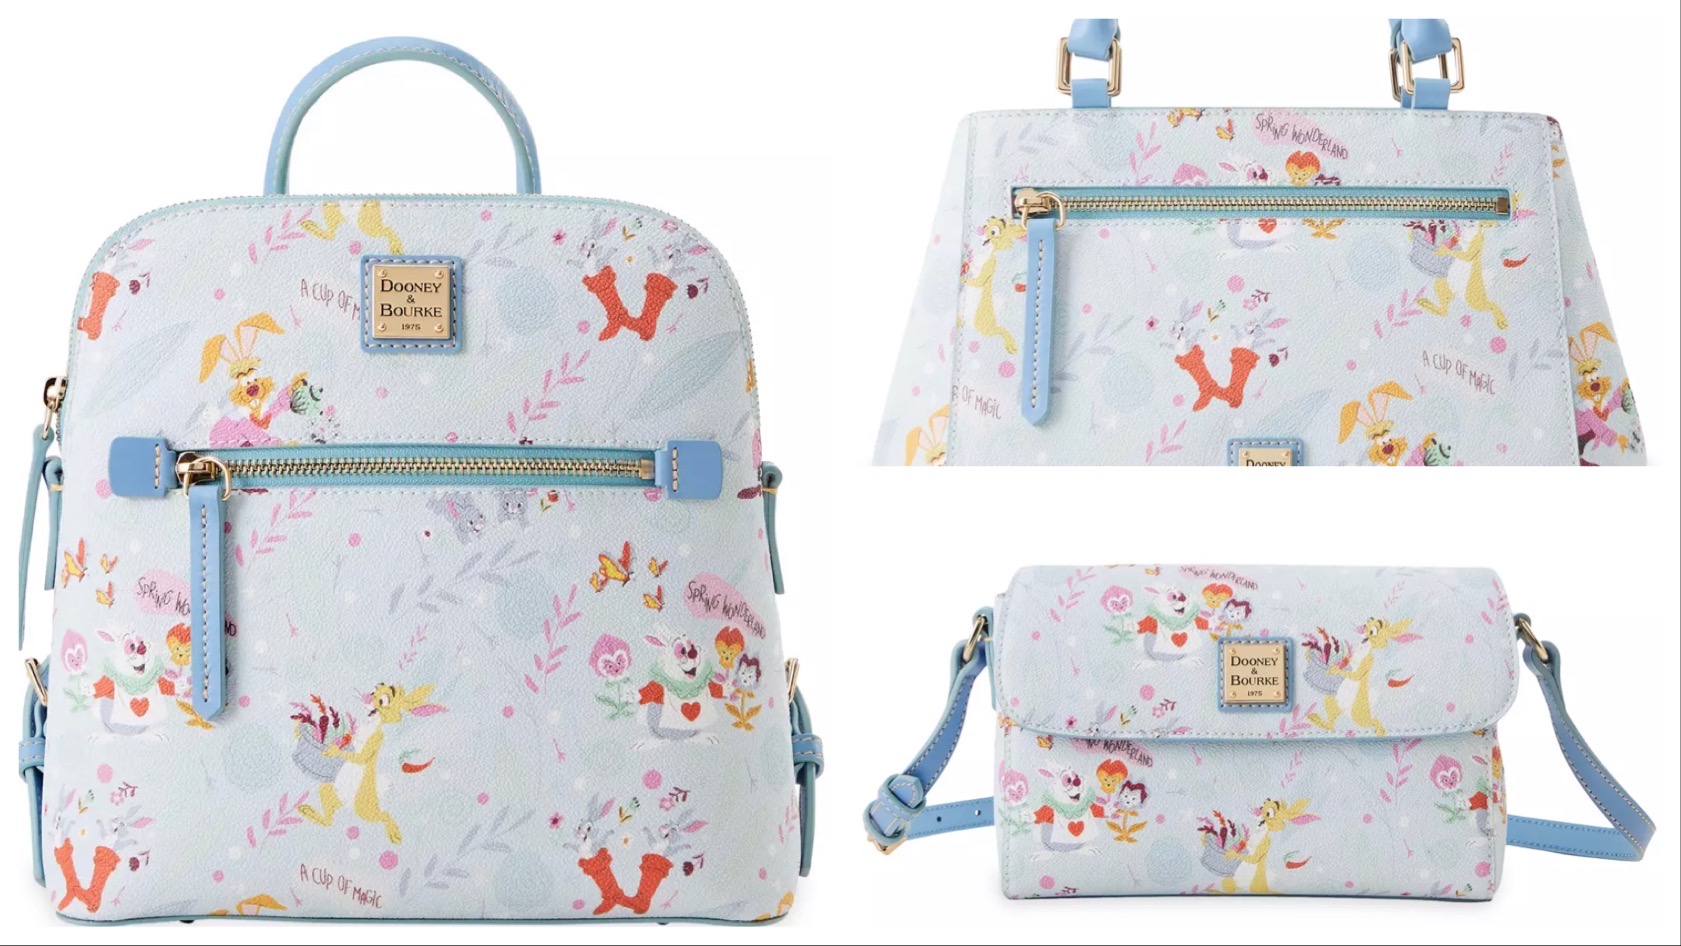 New Disney Rabbits Dooney & Bourke Collection Available Now! | Chip and ...